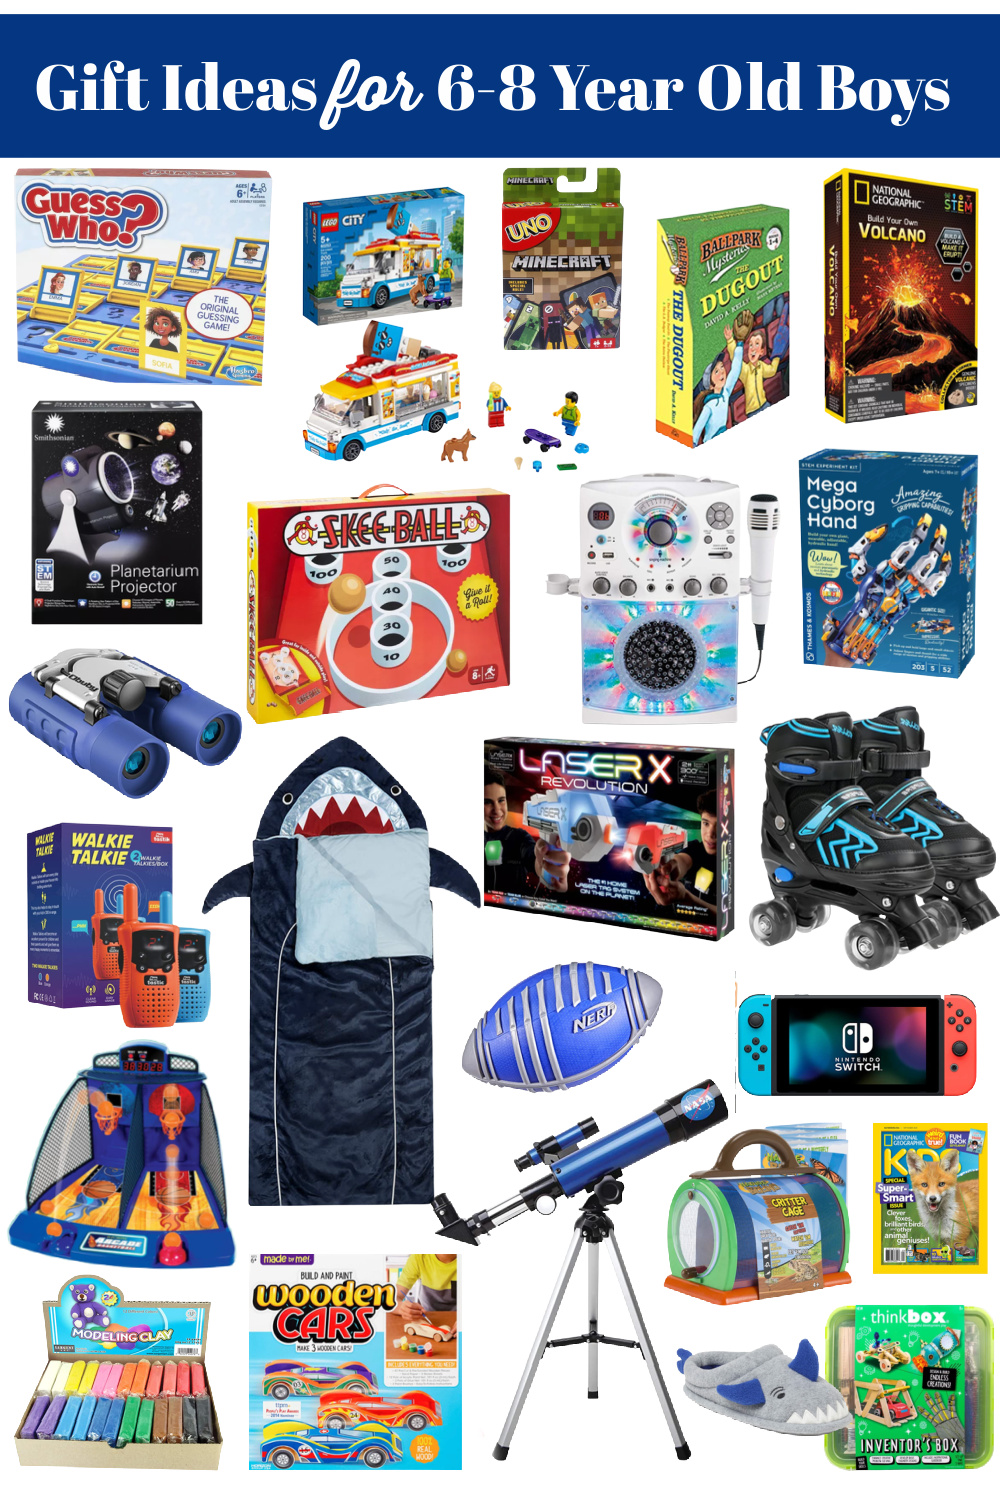 Gift Ideas for 6-8 Year Old Boys